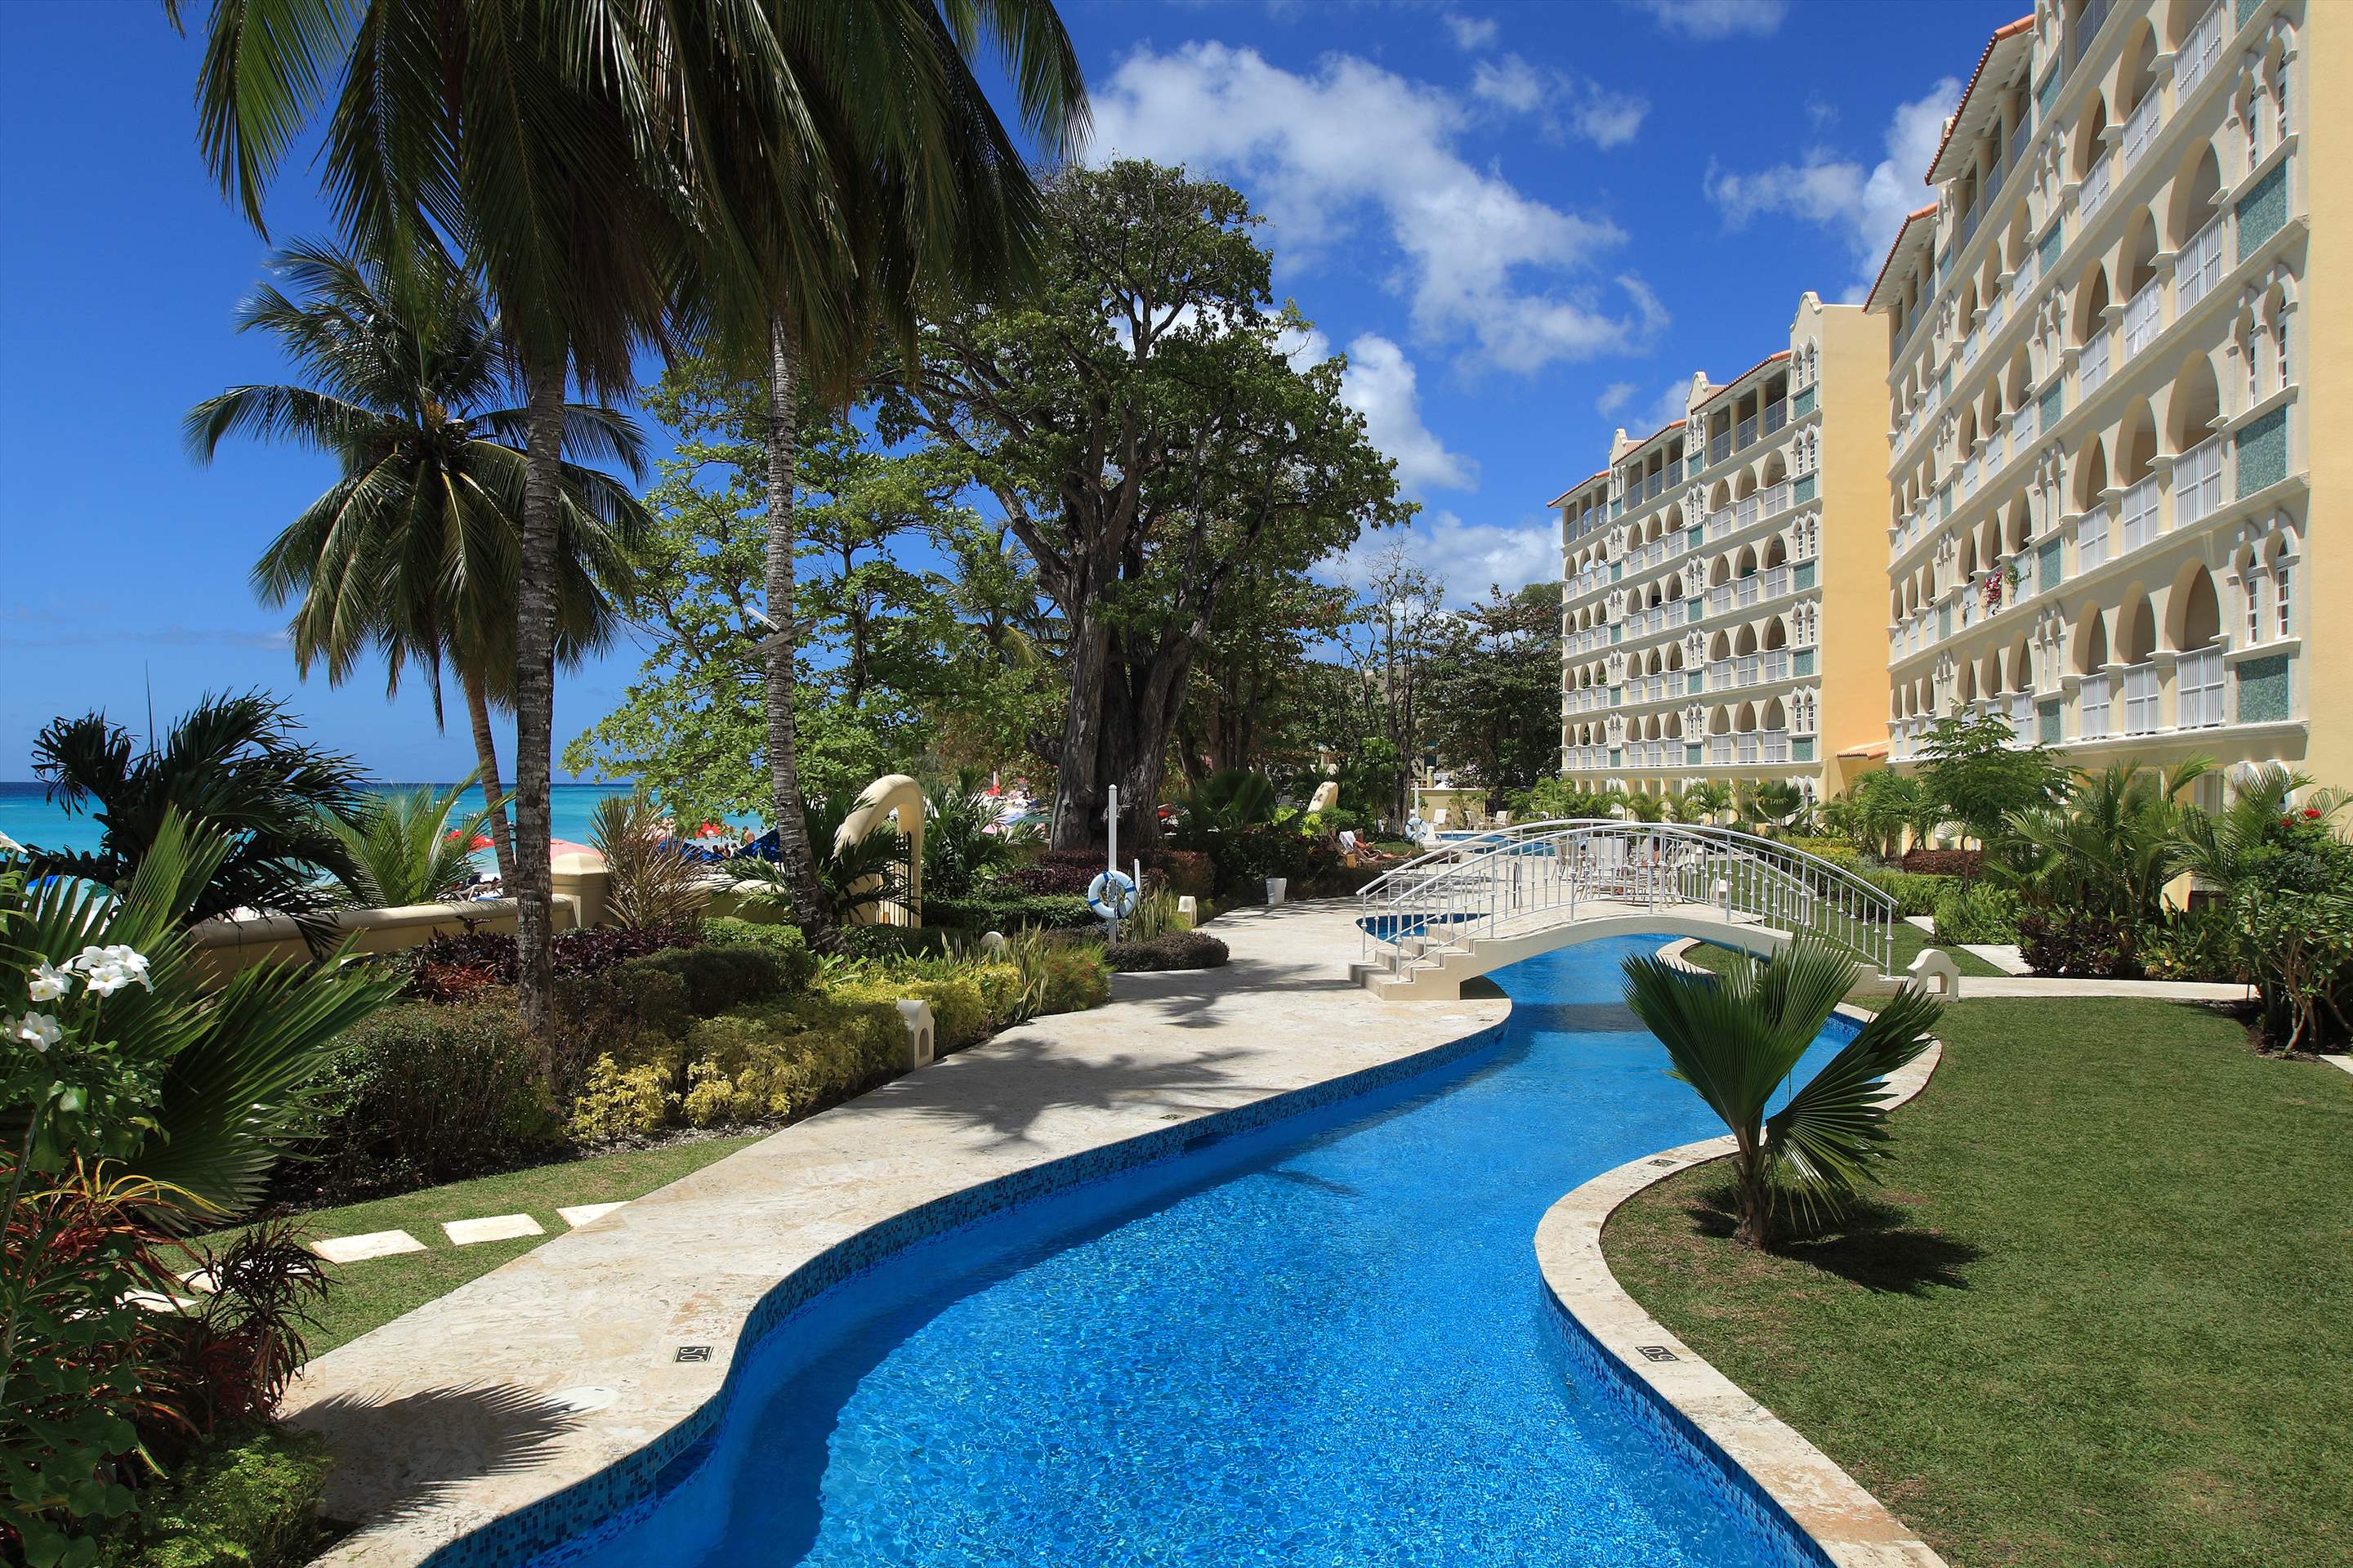 Sapphire Beach 517, 2 bedroom, 3 bedroom apartment in St. Lawrence Gap & South Coast, Barbados Photo #3